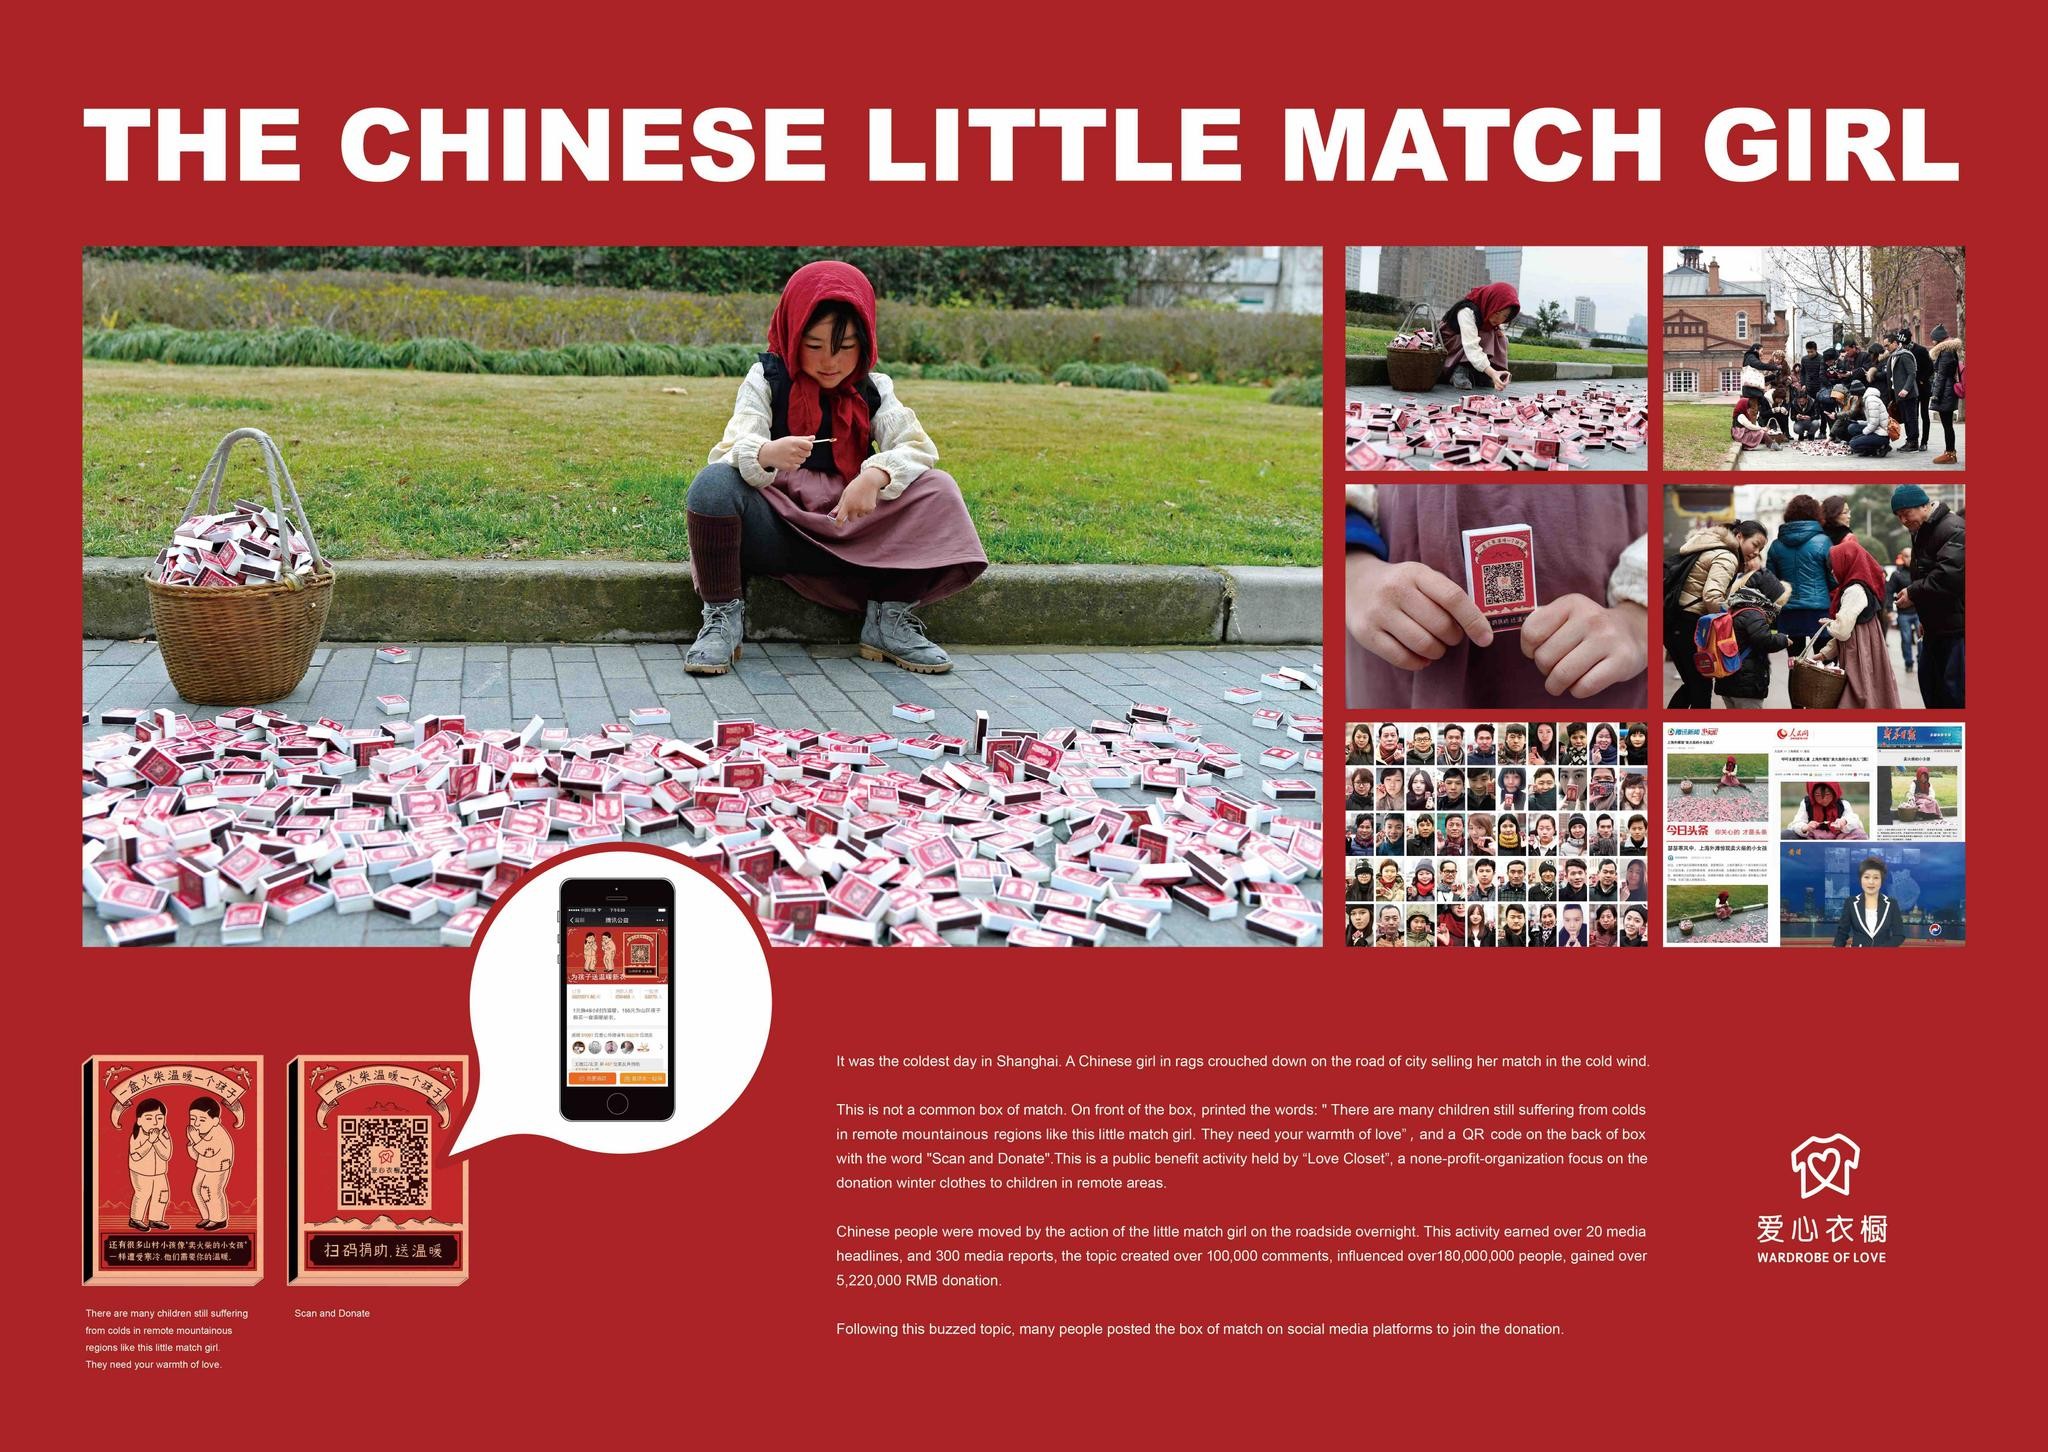 The Chinese Little Match Girl